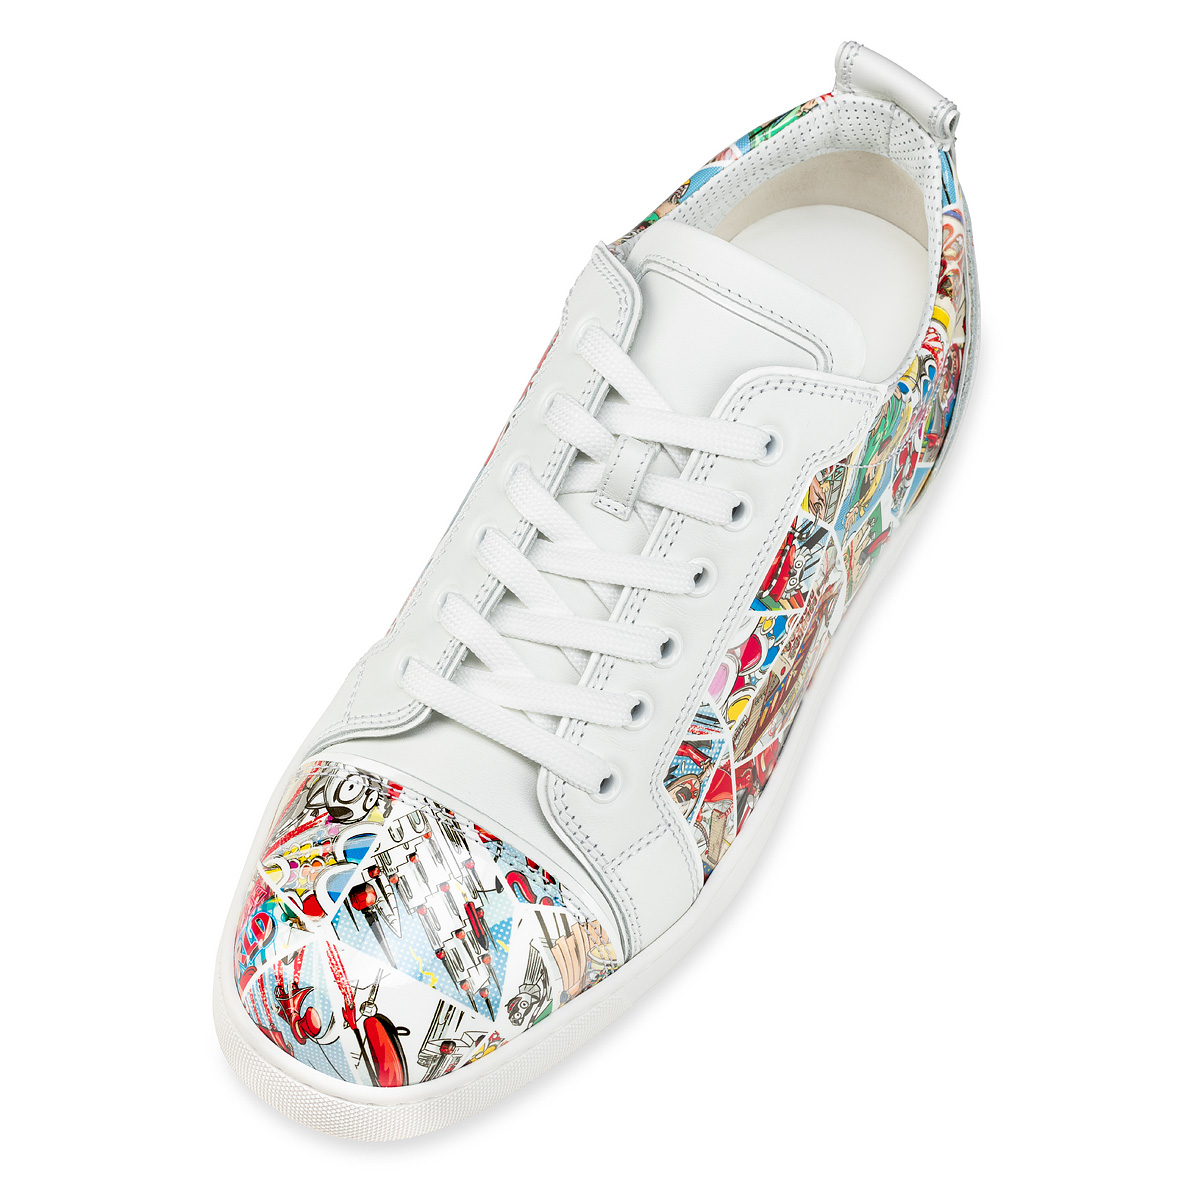 Christian Louboutin Fun Louis Junior White And Green Leather Sneakers New